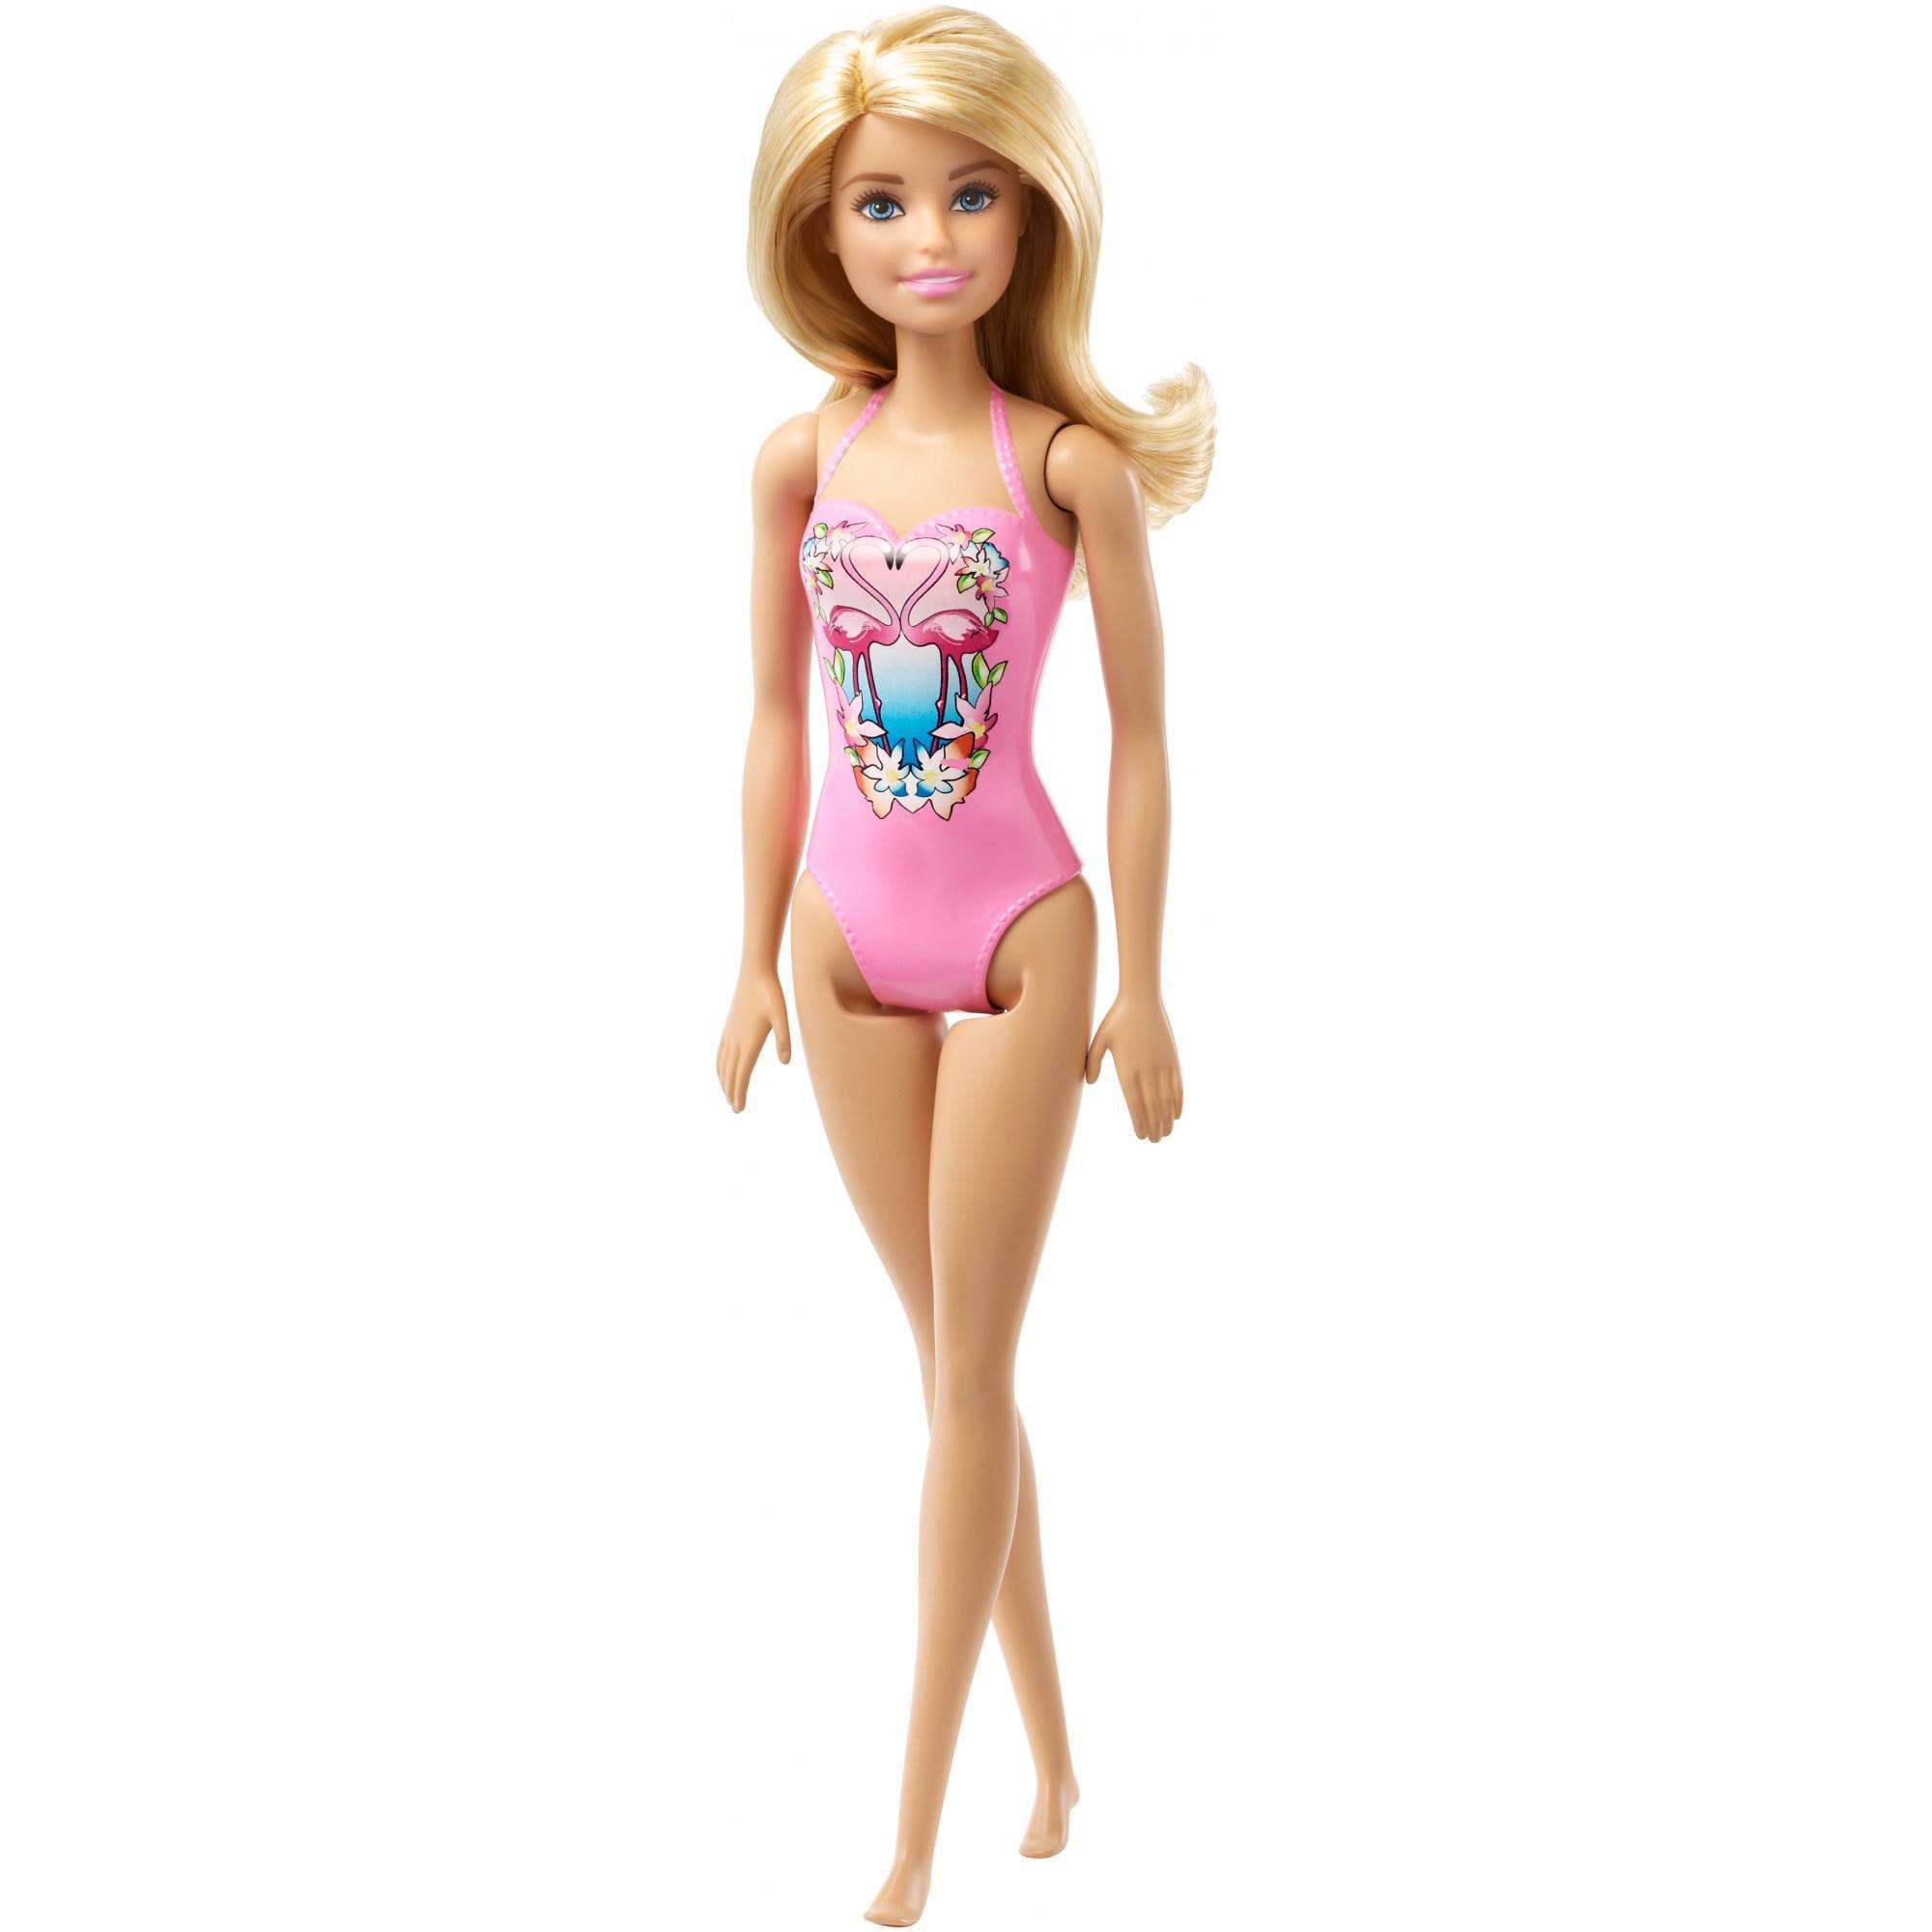 barbie swimsuits